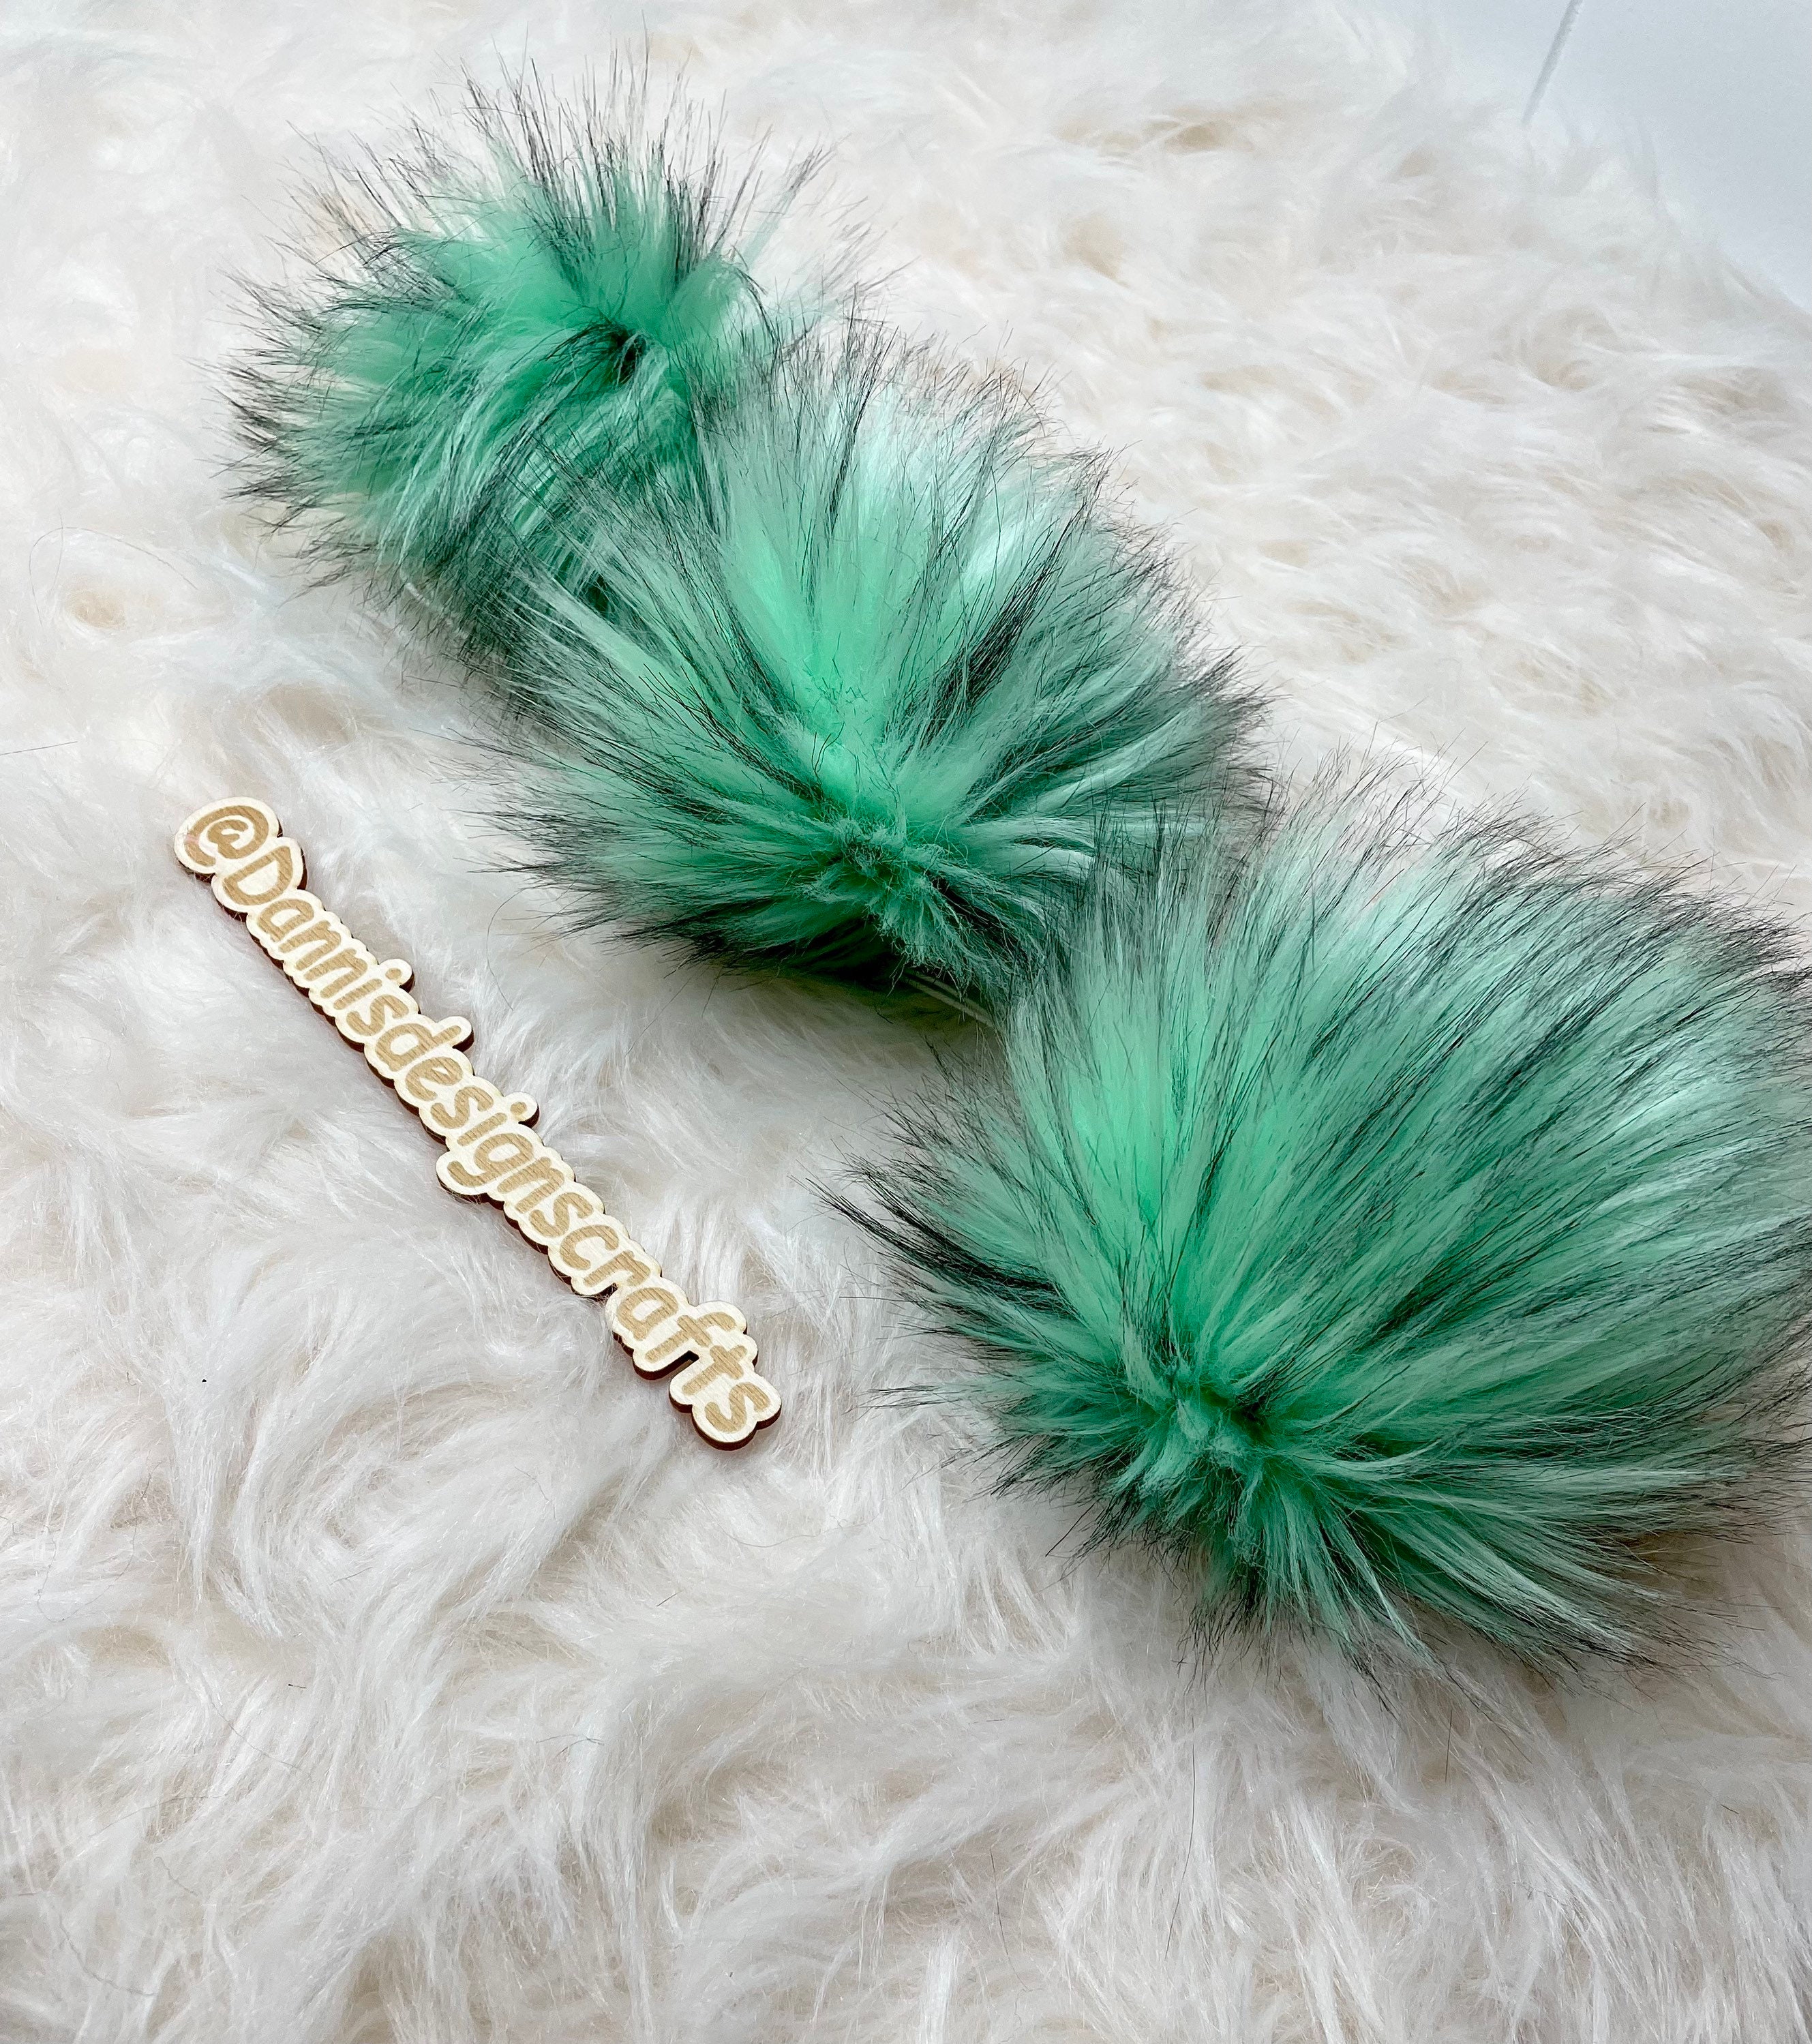 Mint Husky Faux Fur Pom Pom, Mint With Black Tips, Small, Medium, Large,  Fluffy, Pre Made, Tie On, Cotton String, for Beanies, Scarves 